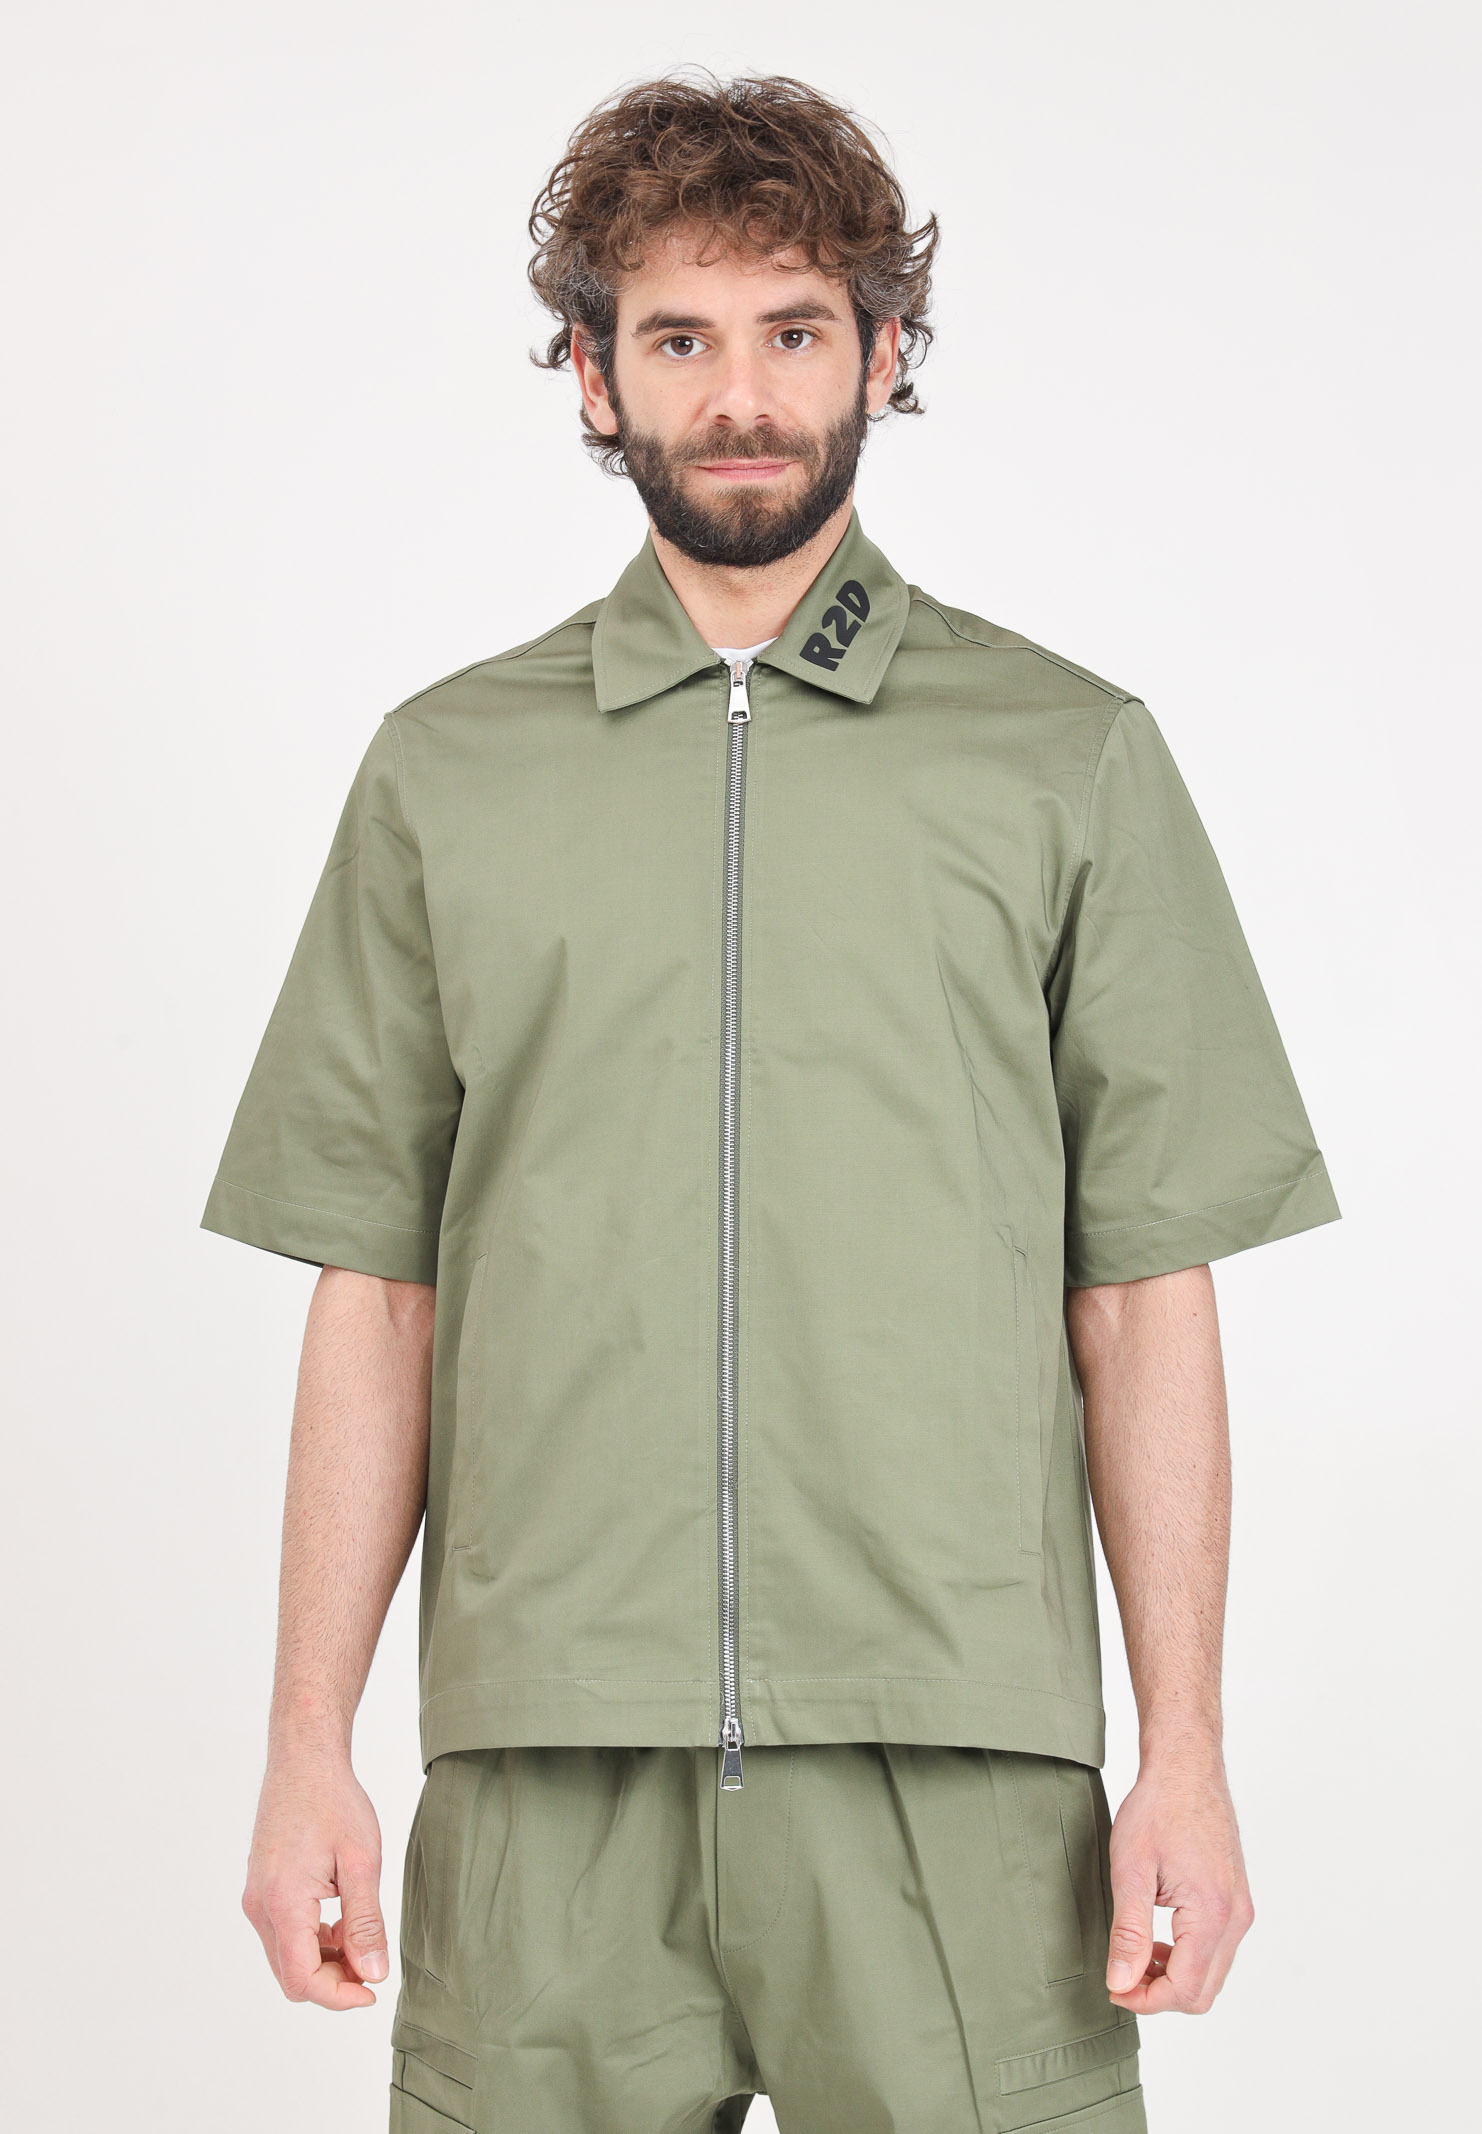 Military green men's shirt with black logo patch on the collar - READY ...